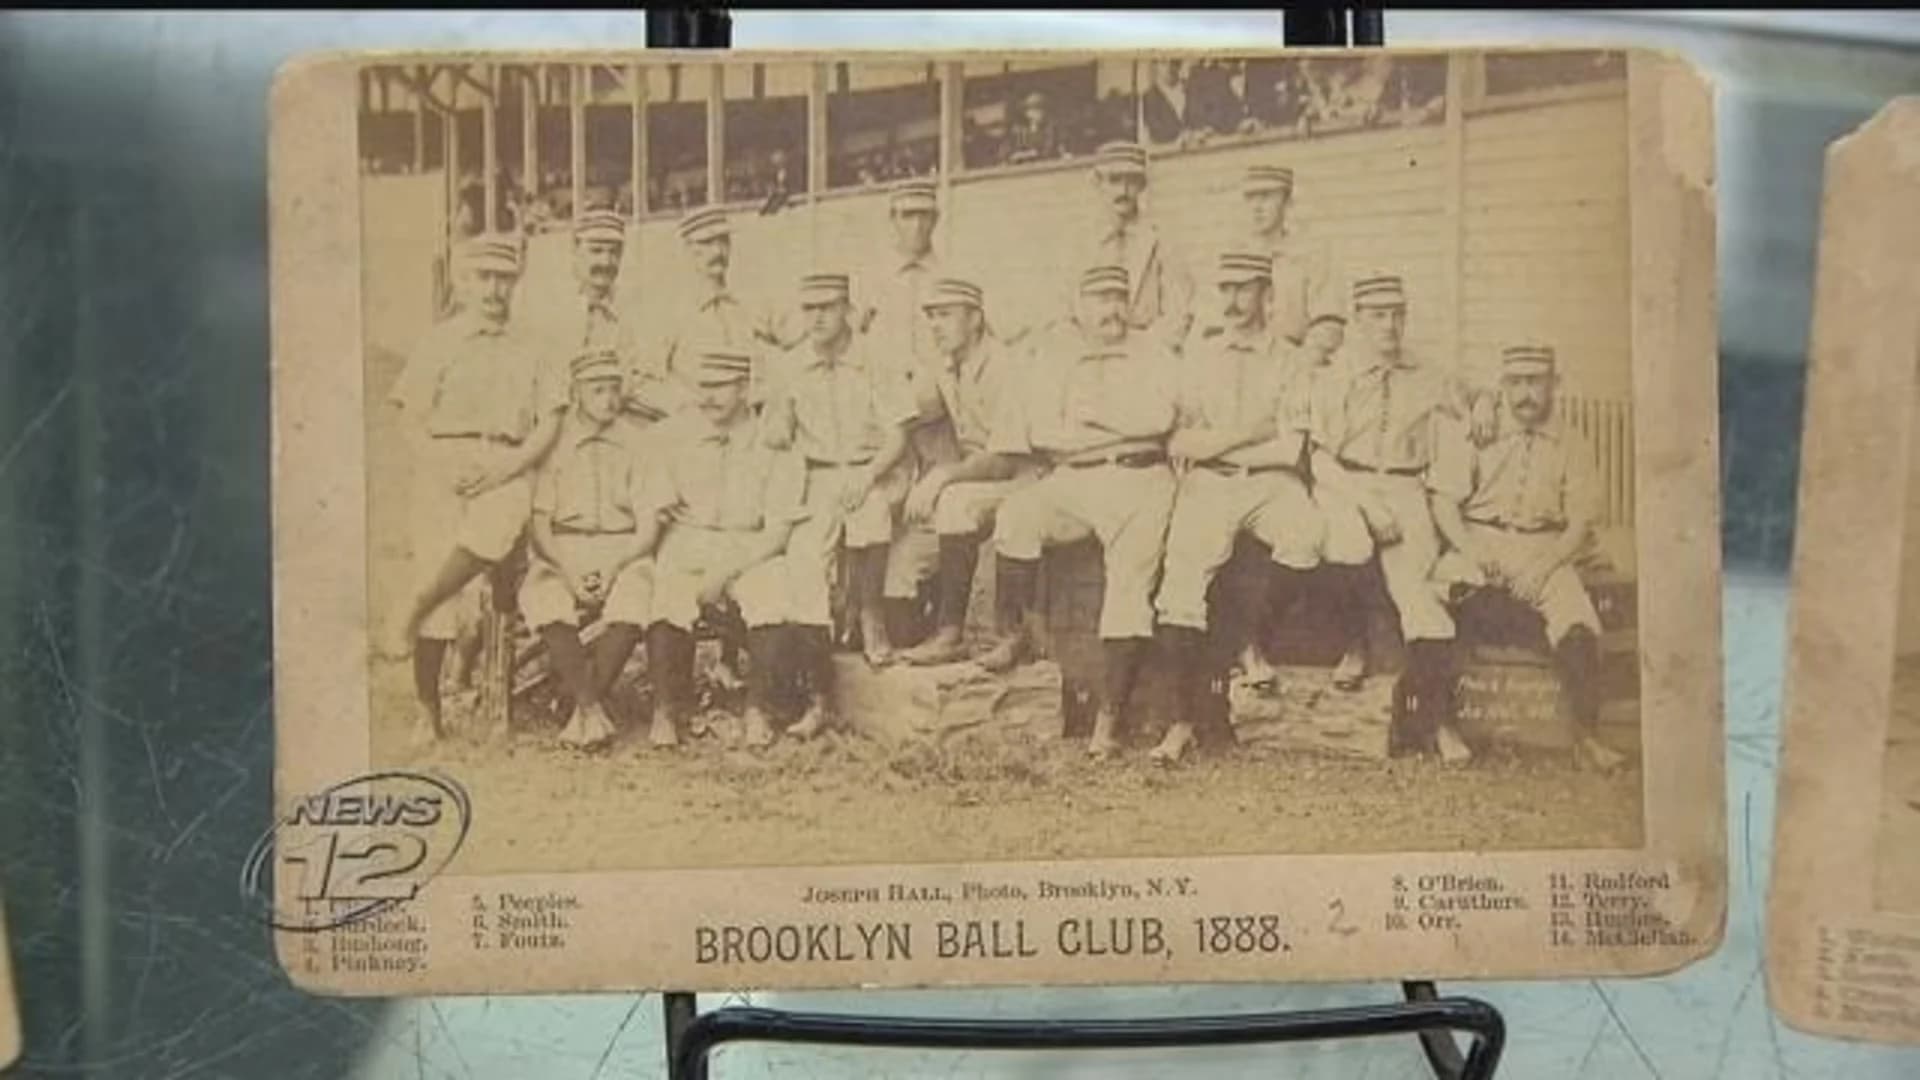 19th century baseball cards to be auctioned off in Lynbrook